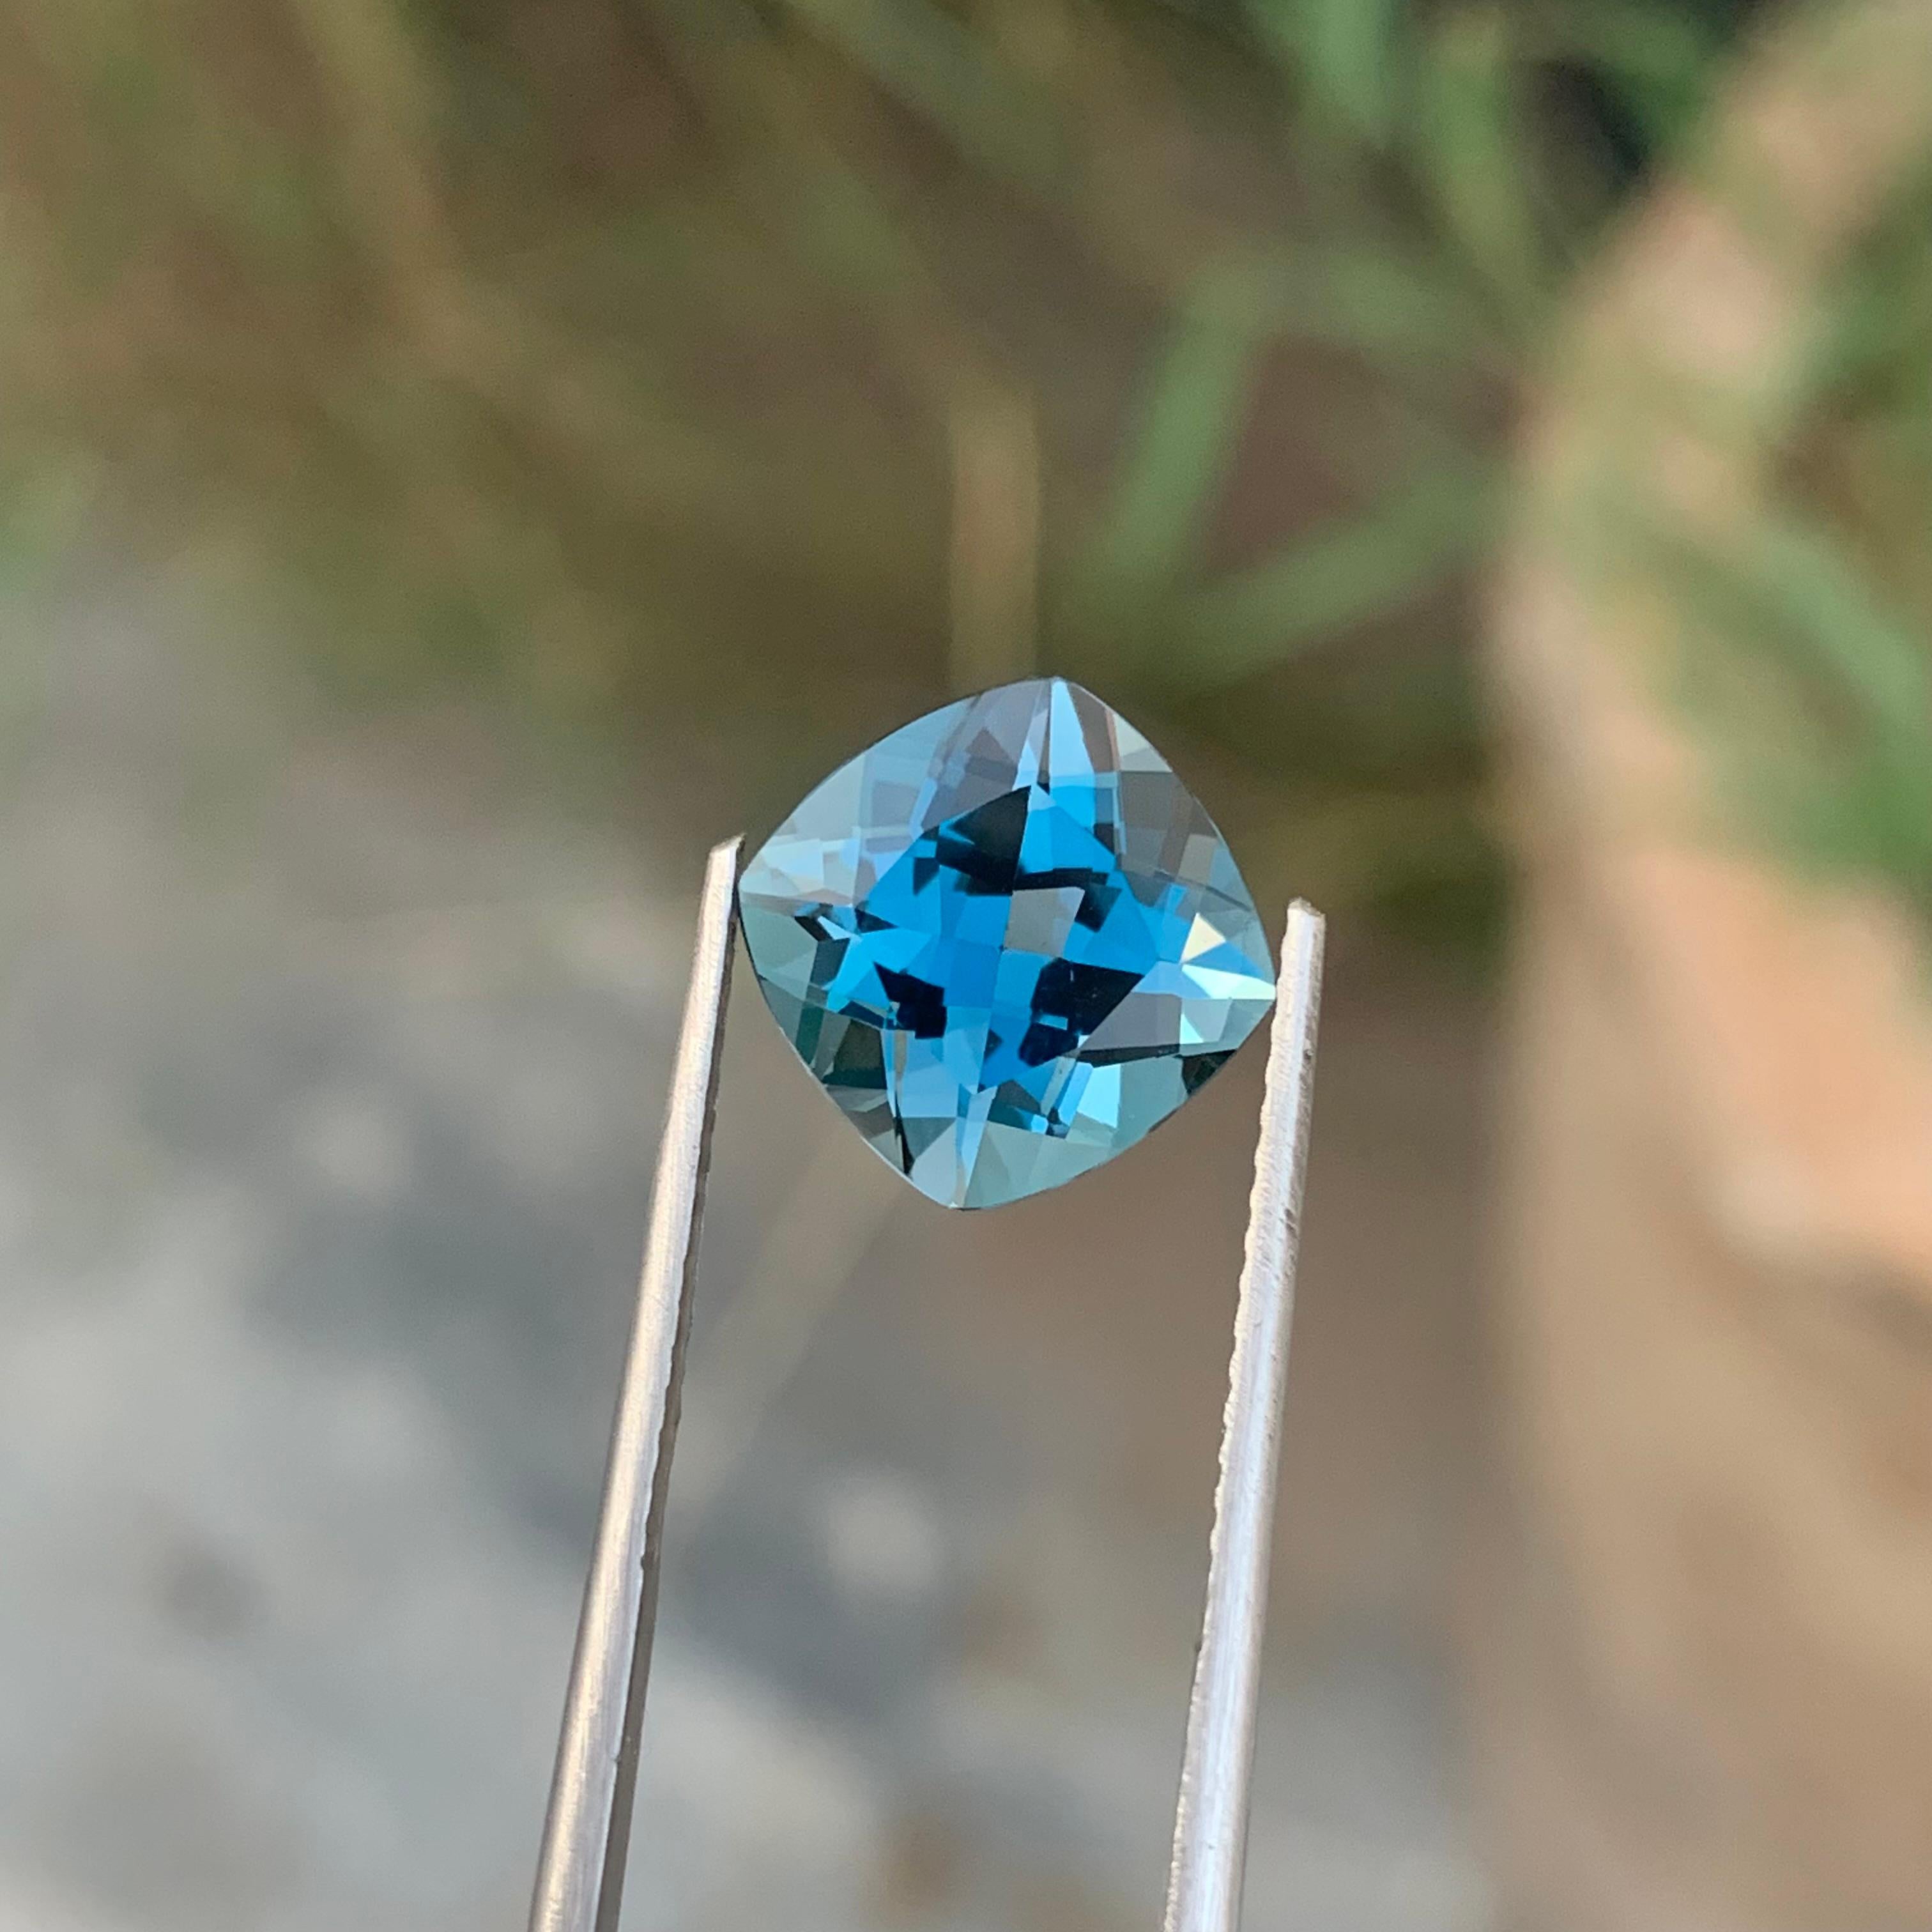 Loose London Blue Topaz

Weight: 4.15 Carats
Dimension: 9.2 x 9.2 x 6.4 Mm
Origin: Brazil
Shape: Square Fancy
Color: Deep Blue
Certificate: On Customer Demand

London Blue Topaz is a mesmerizing variety of topaz renowned for its deep and enchanting